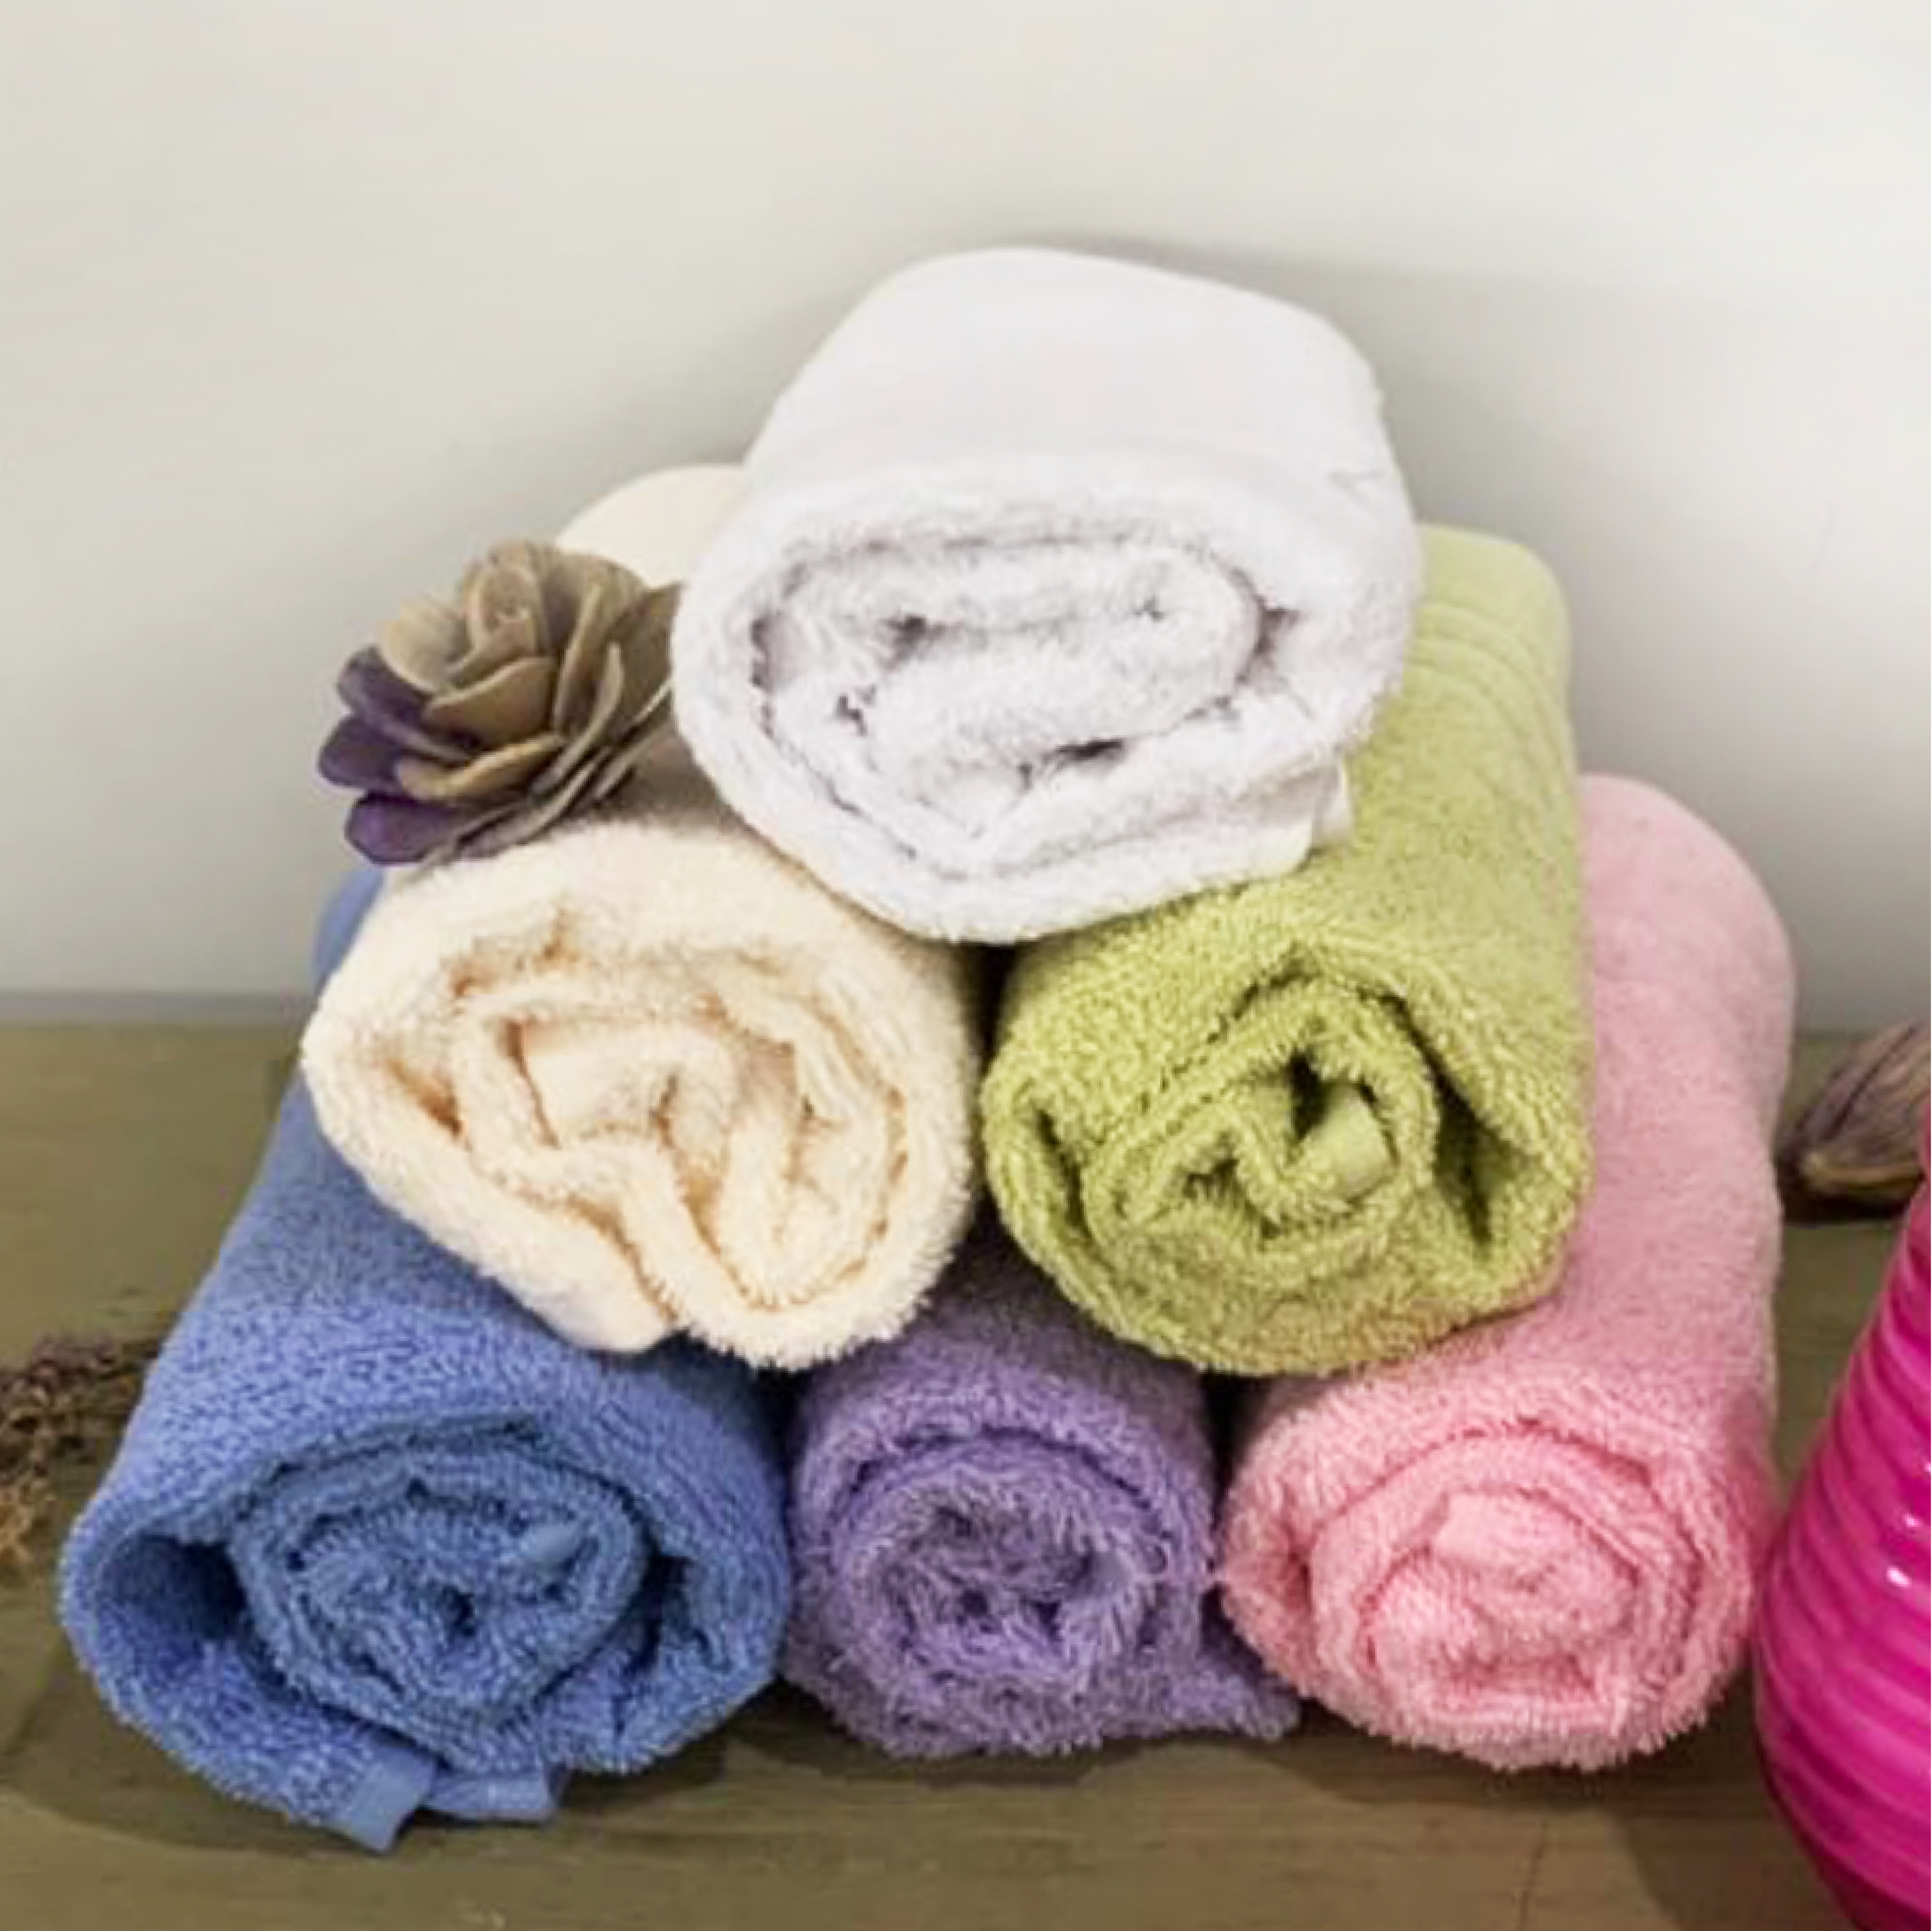 Coventry Bath Towel, 1 Piece 45x60cm 100% Cotton Available in Colors